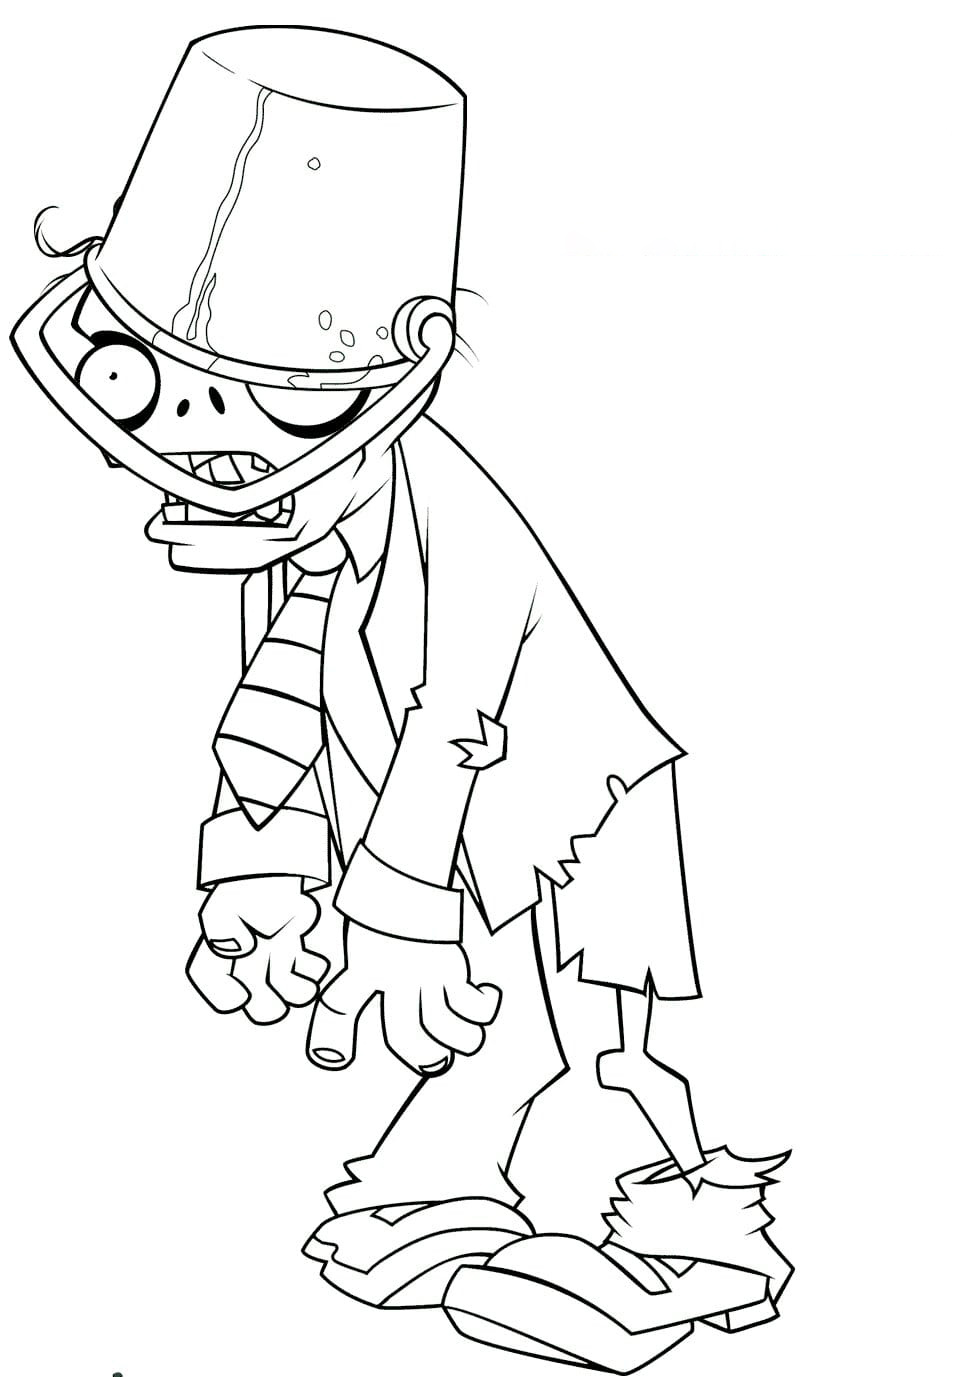 Buckethead Zombie Coloring Pages